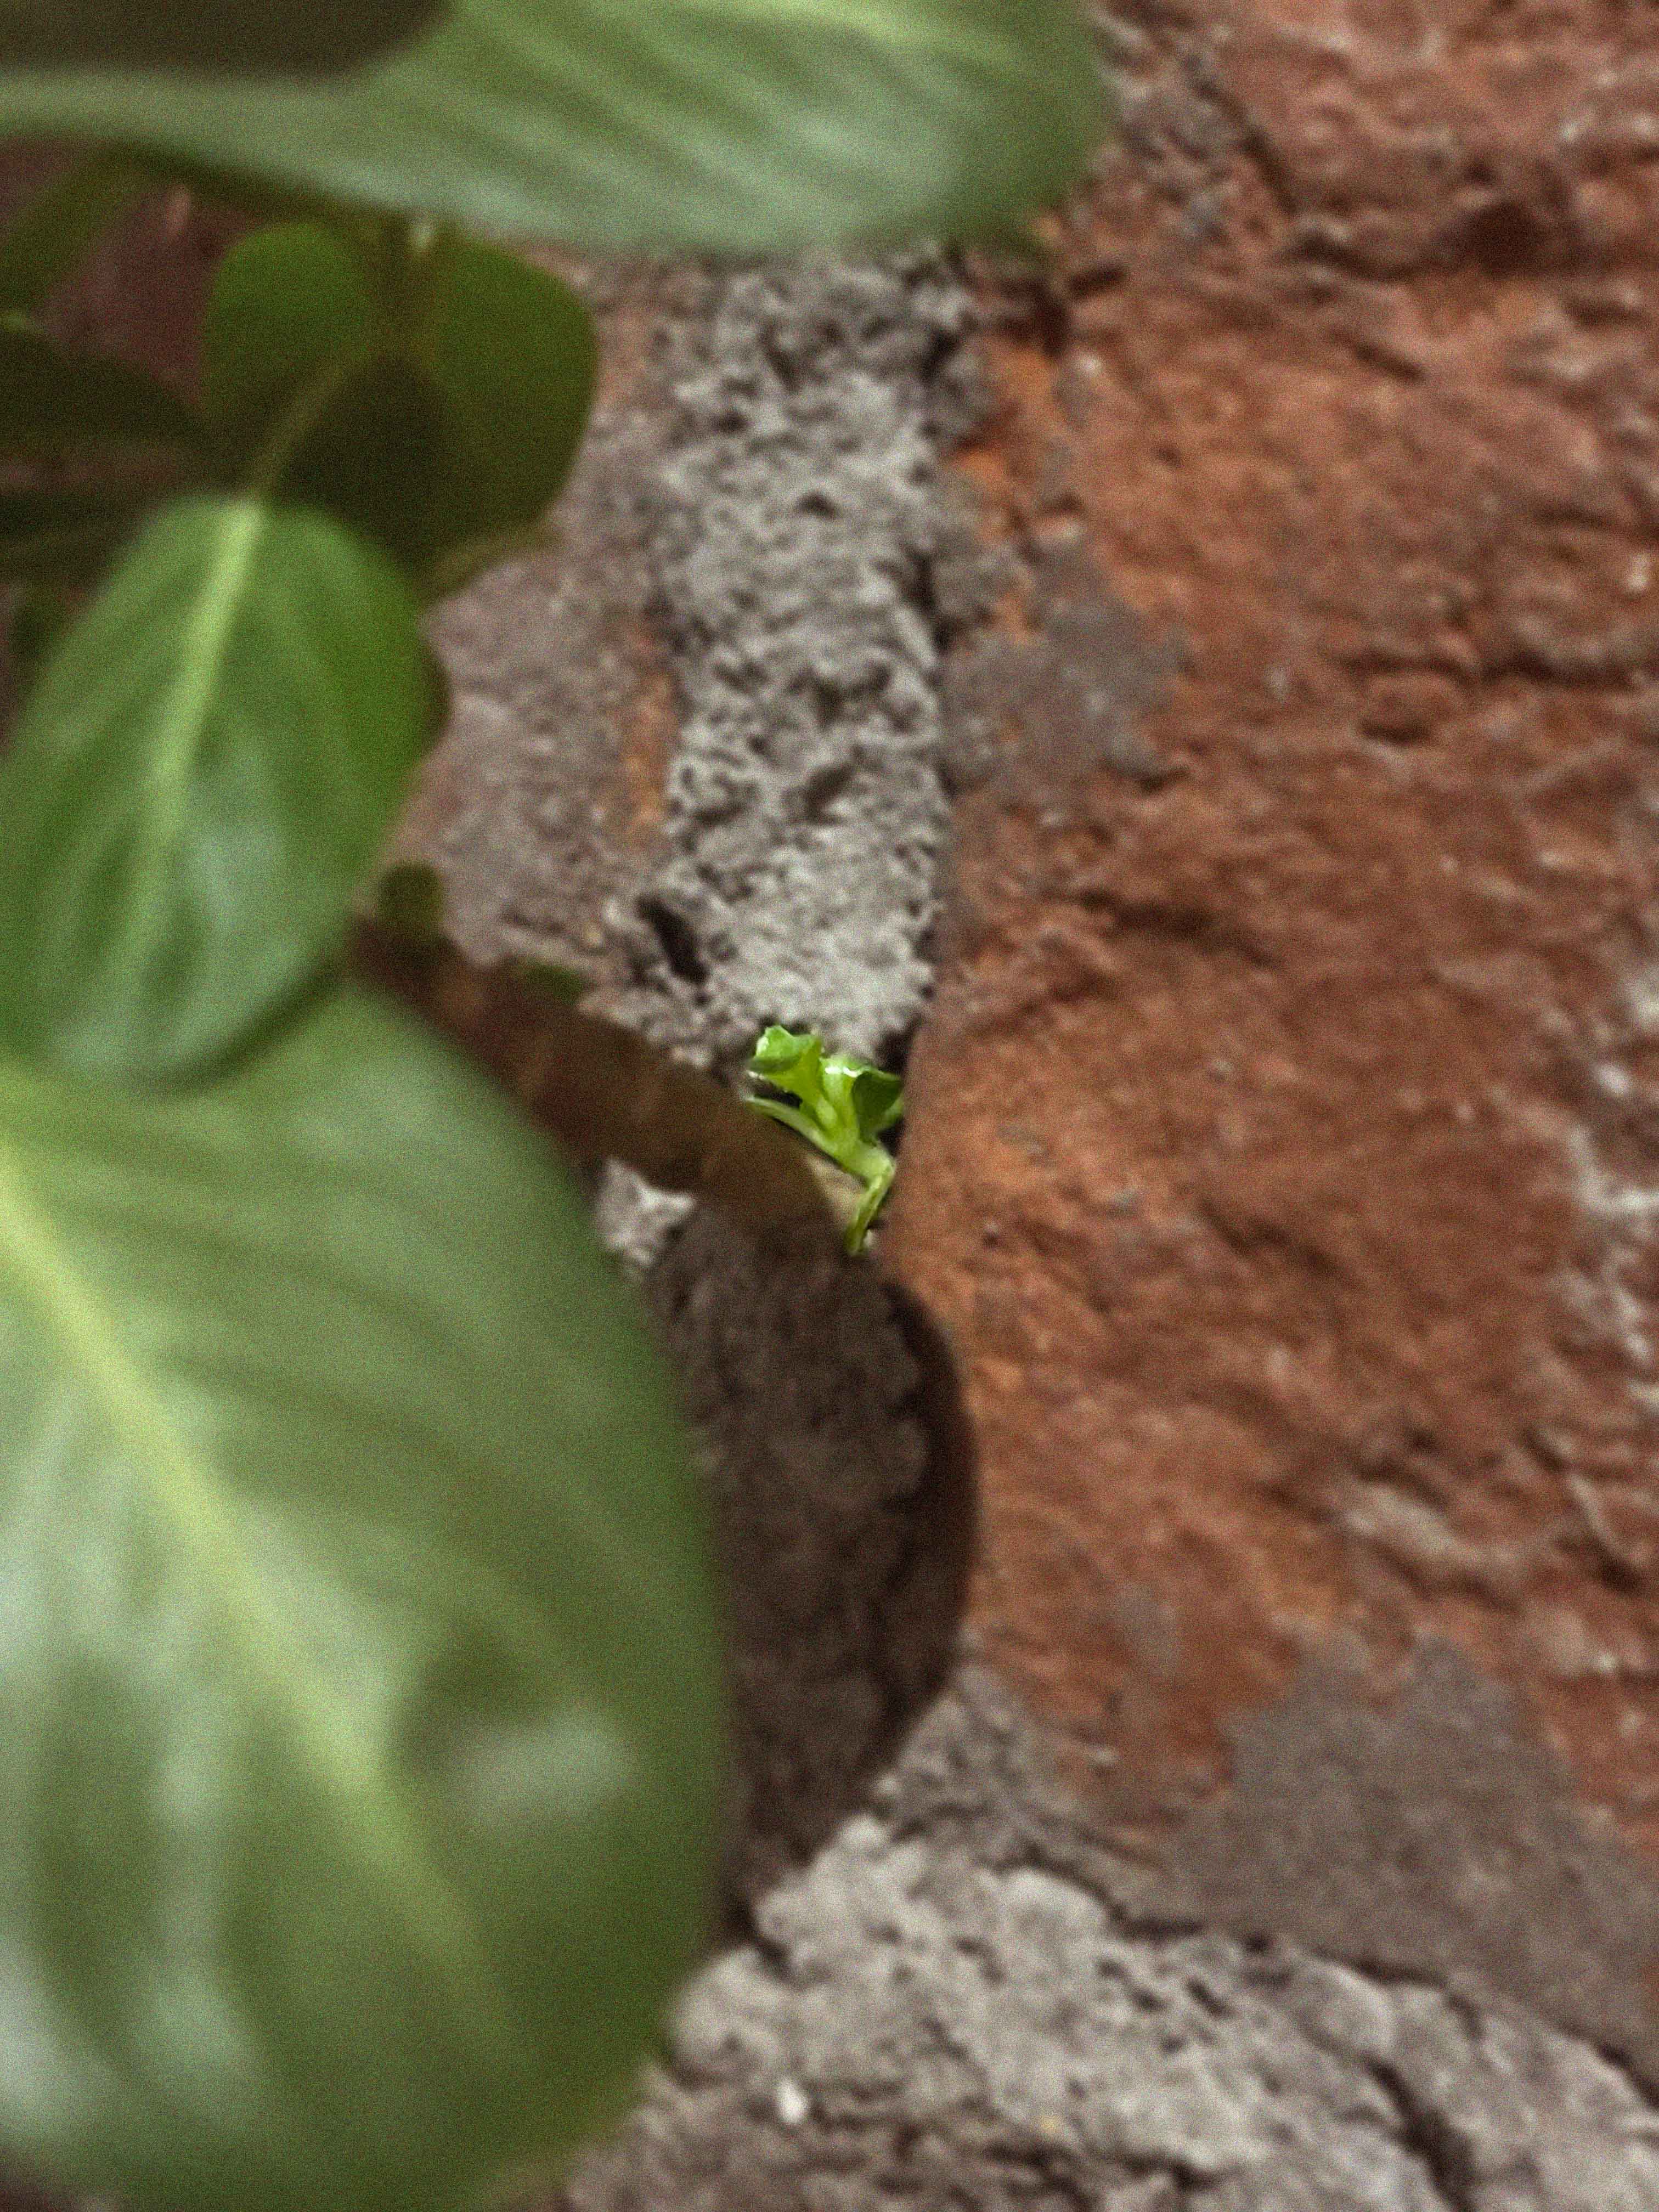 a ‘sadabahar’ [the name translates to ‘always prosperous’] plant grow in the limited resources of a brick wall crack